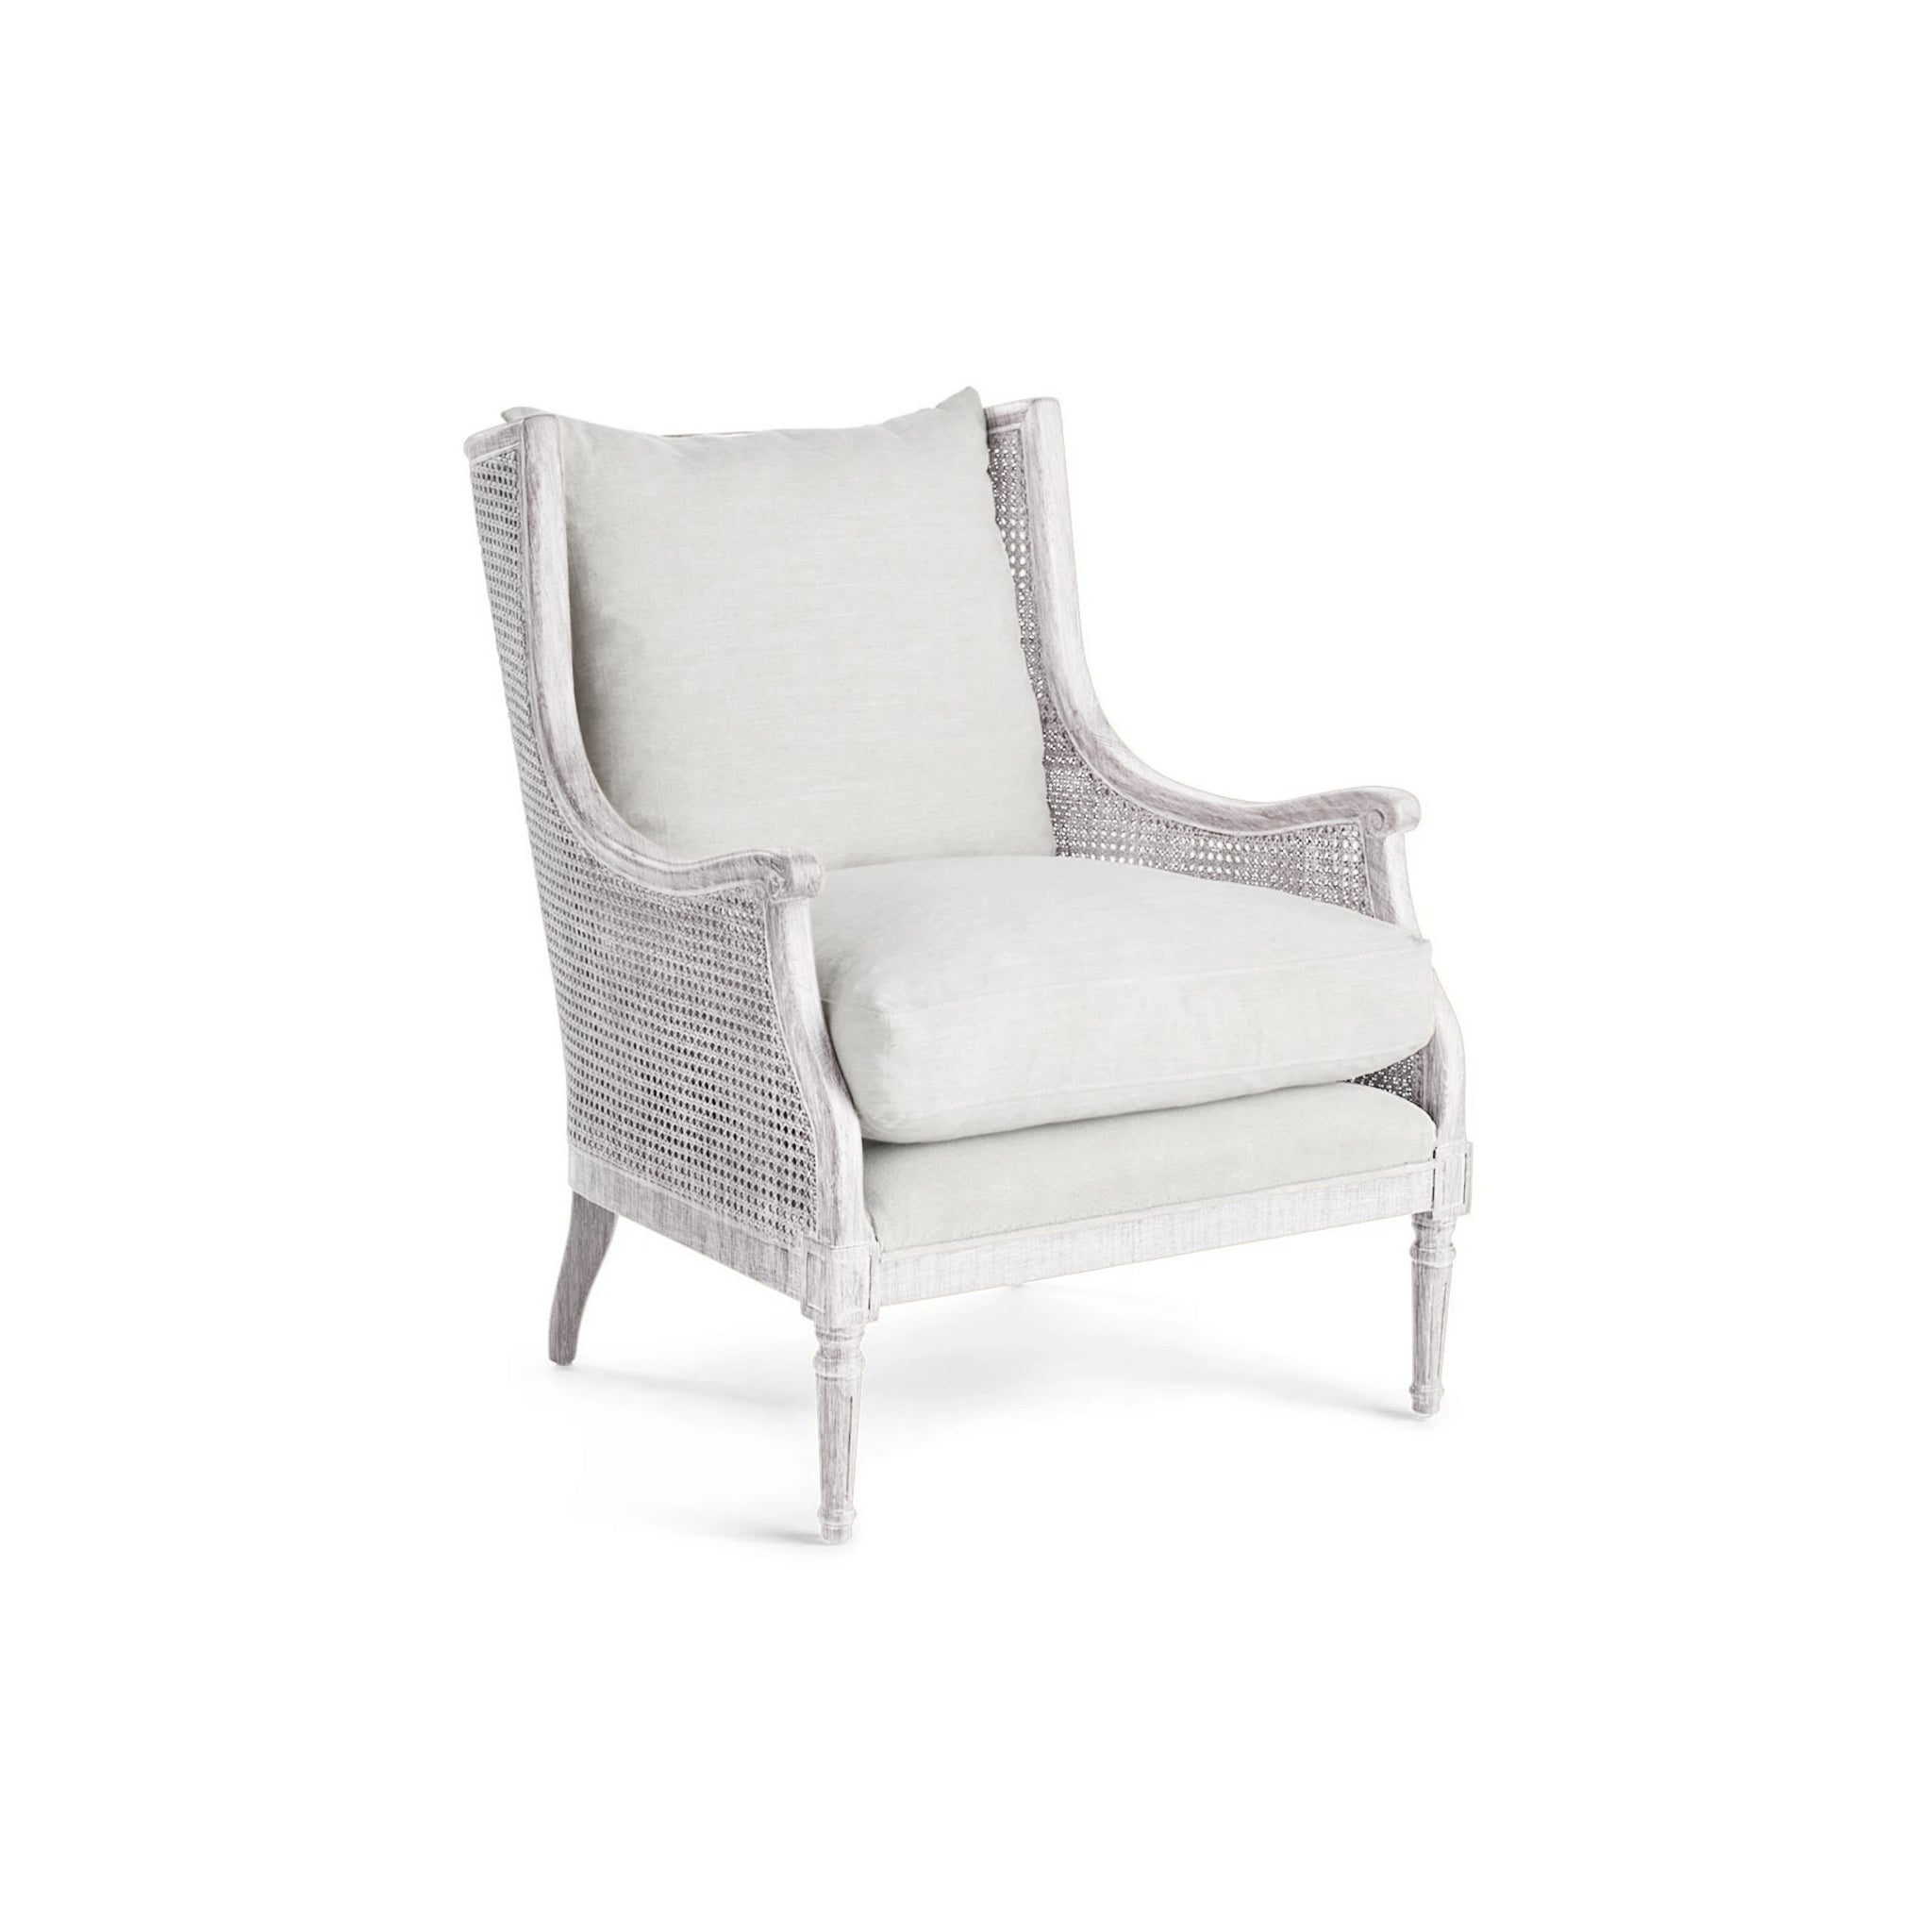 Front Isometric View of the Halle Cane Back Chair (Color - White) on a White Background